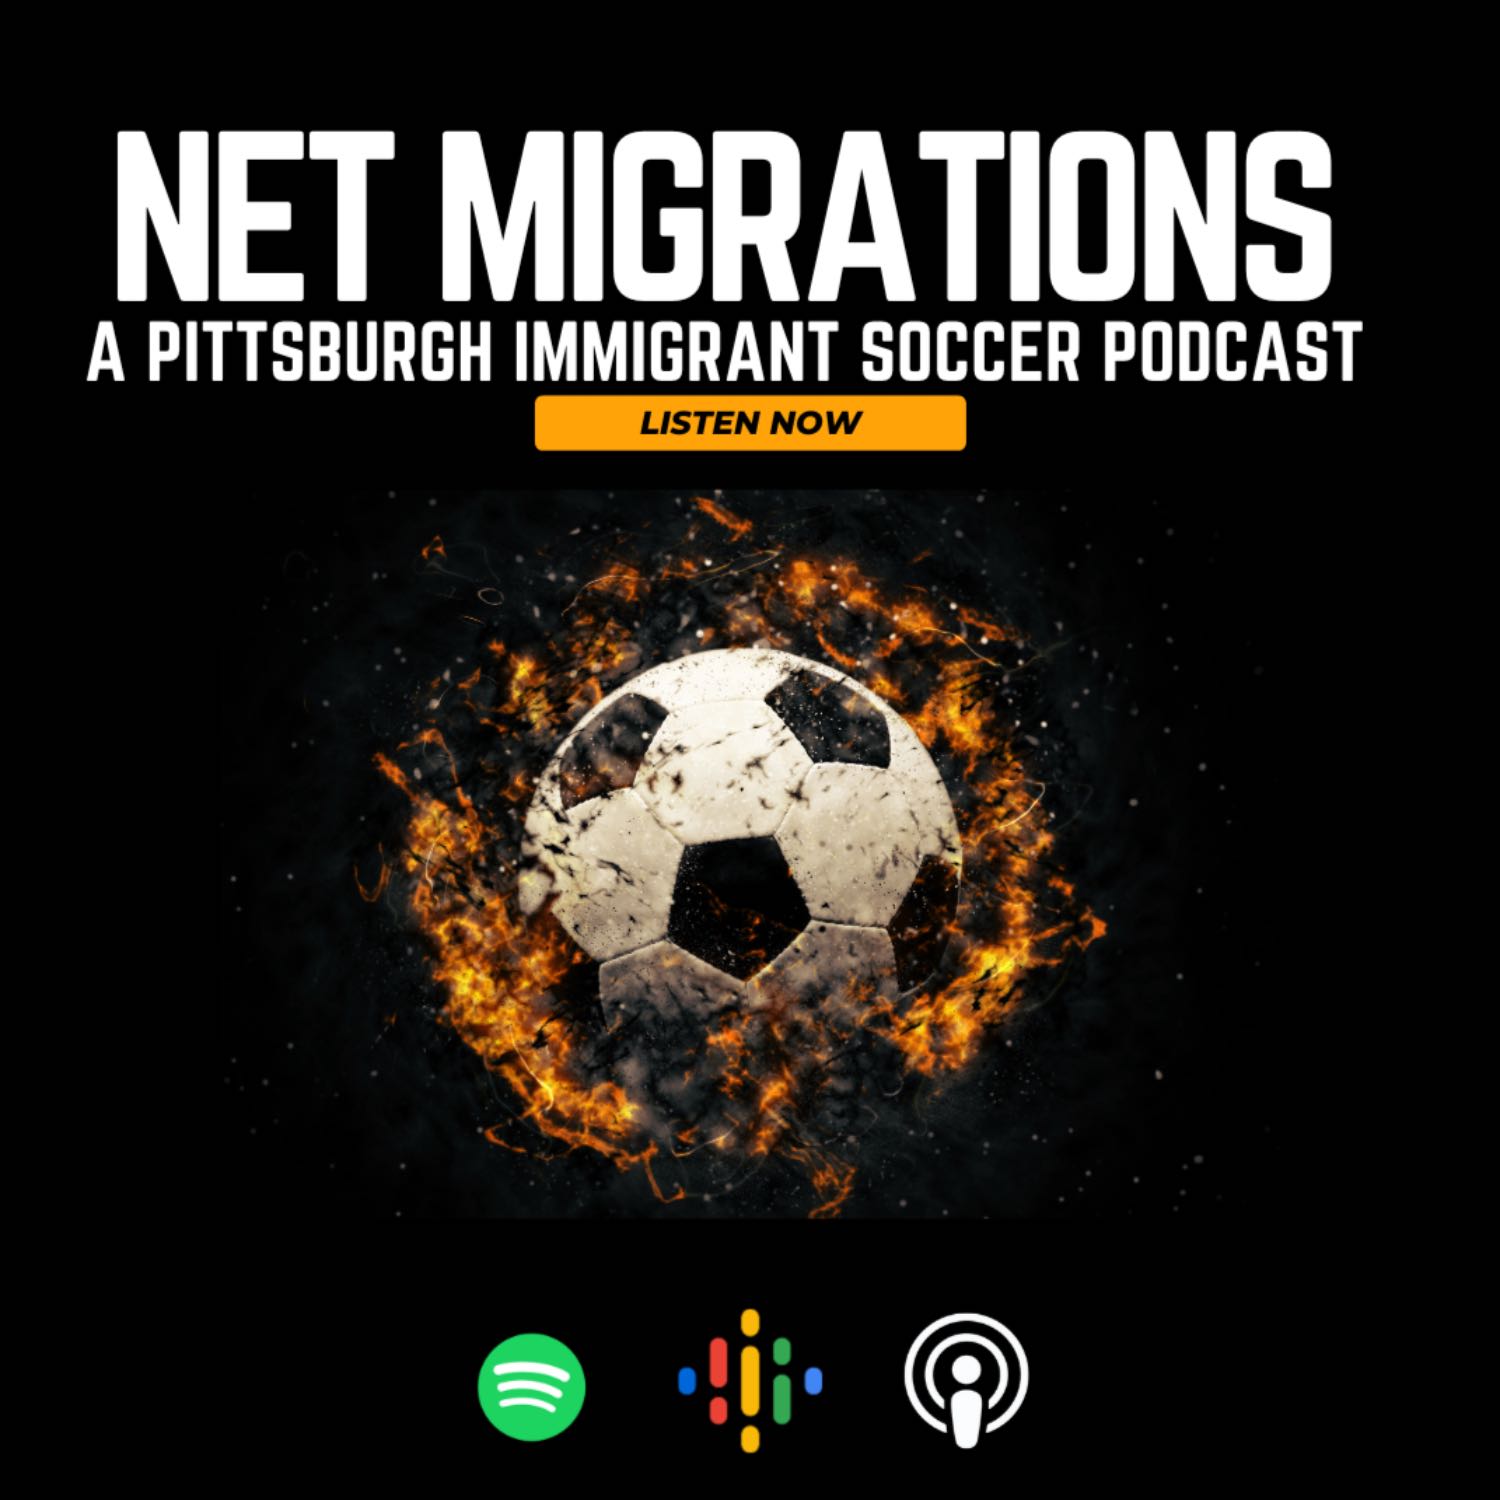 Net Migrations: A Pittsburgh Immigrant Soccer Podcast